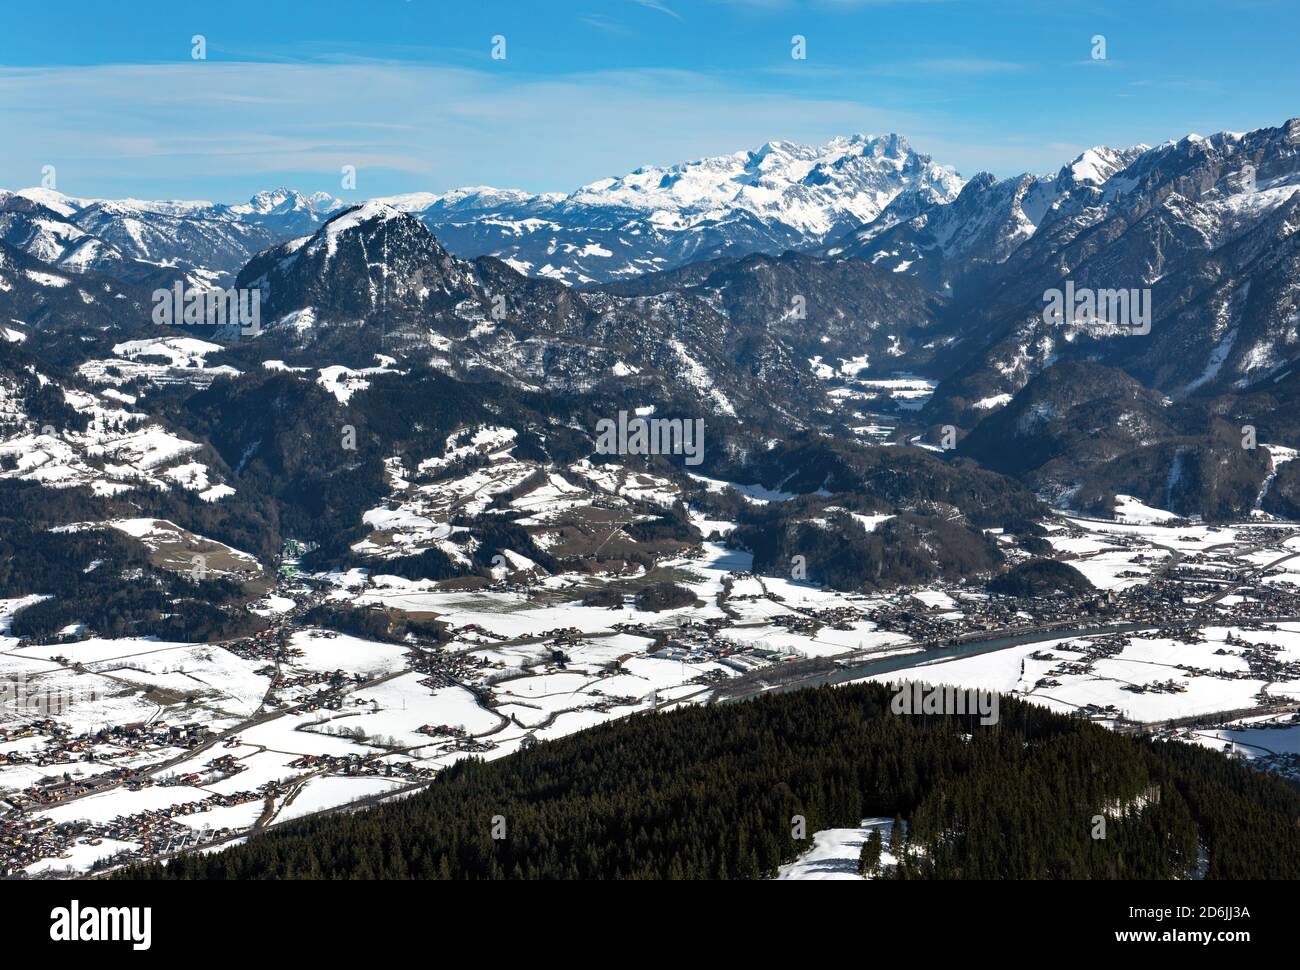 A view of the River Salzach and nearby towns, captured from a viewing area on the Rossfeld Panorama Strasse Alpine pass road, Germany Stock Photo